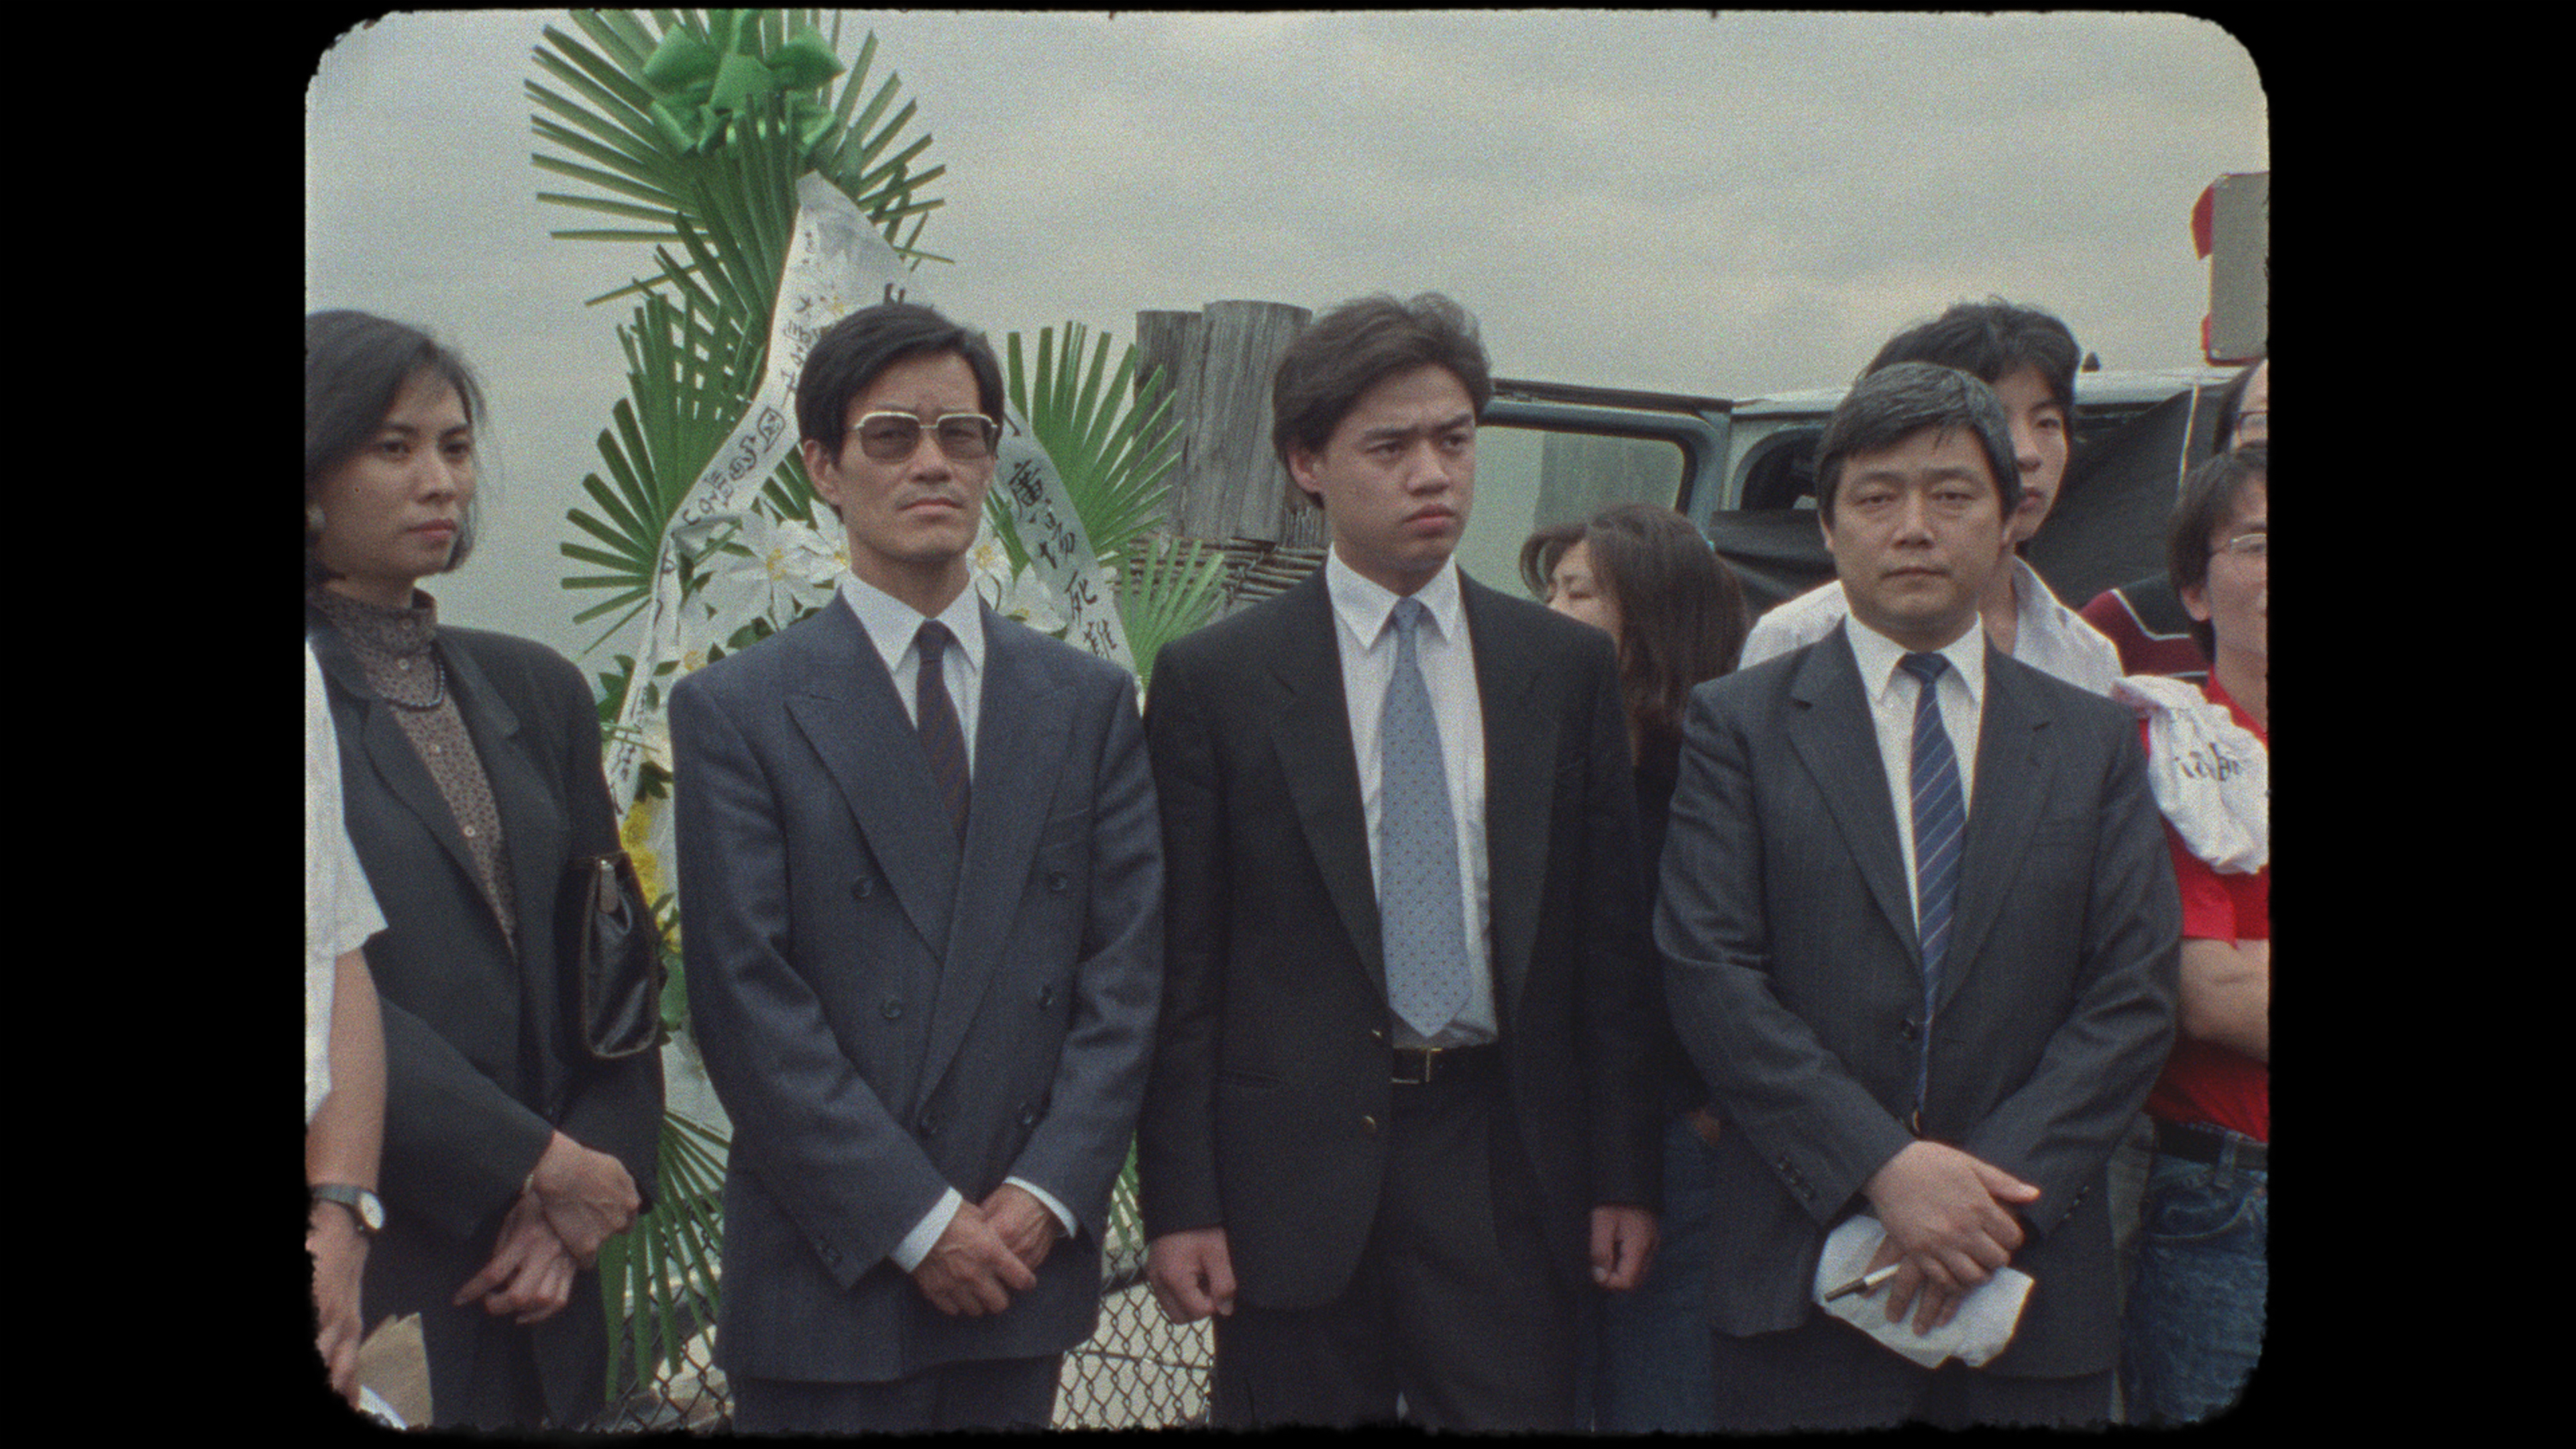 Four Chinese dissidents--one woman and three men--dressed in suits, stand in New York City's Battery Park. From 1989 footage from the suspended project 'Tiananmen/China Today.' Courtesy of Christine Choy 